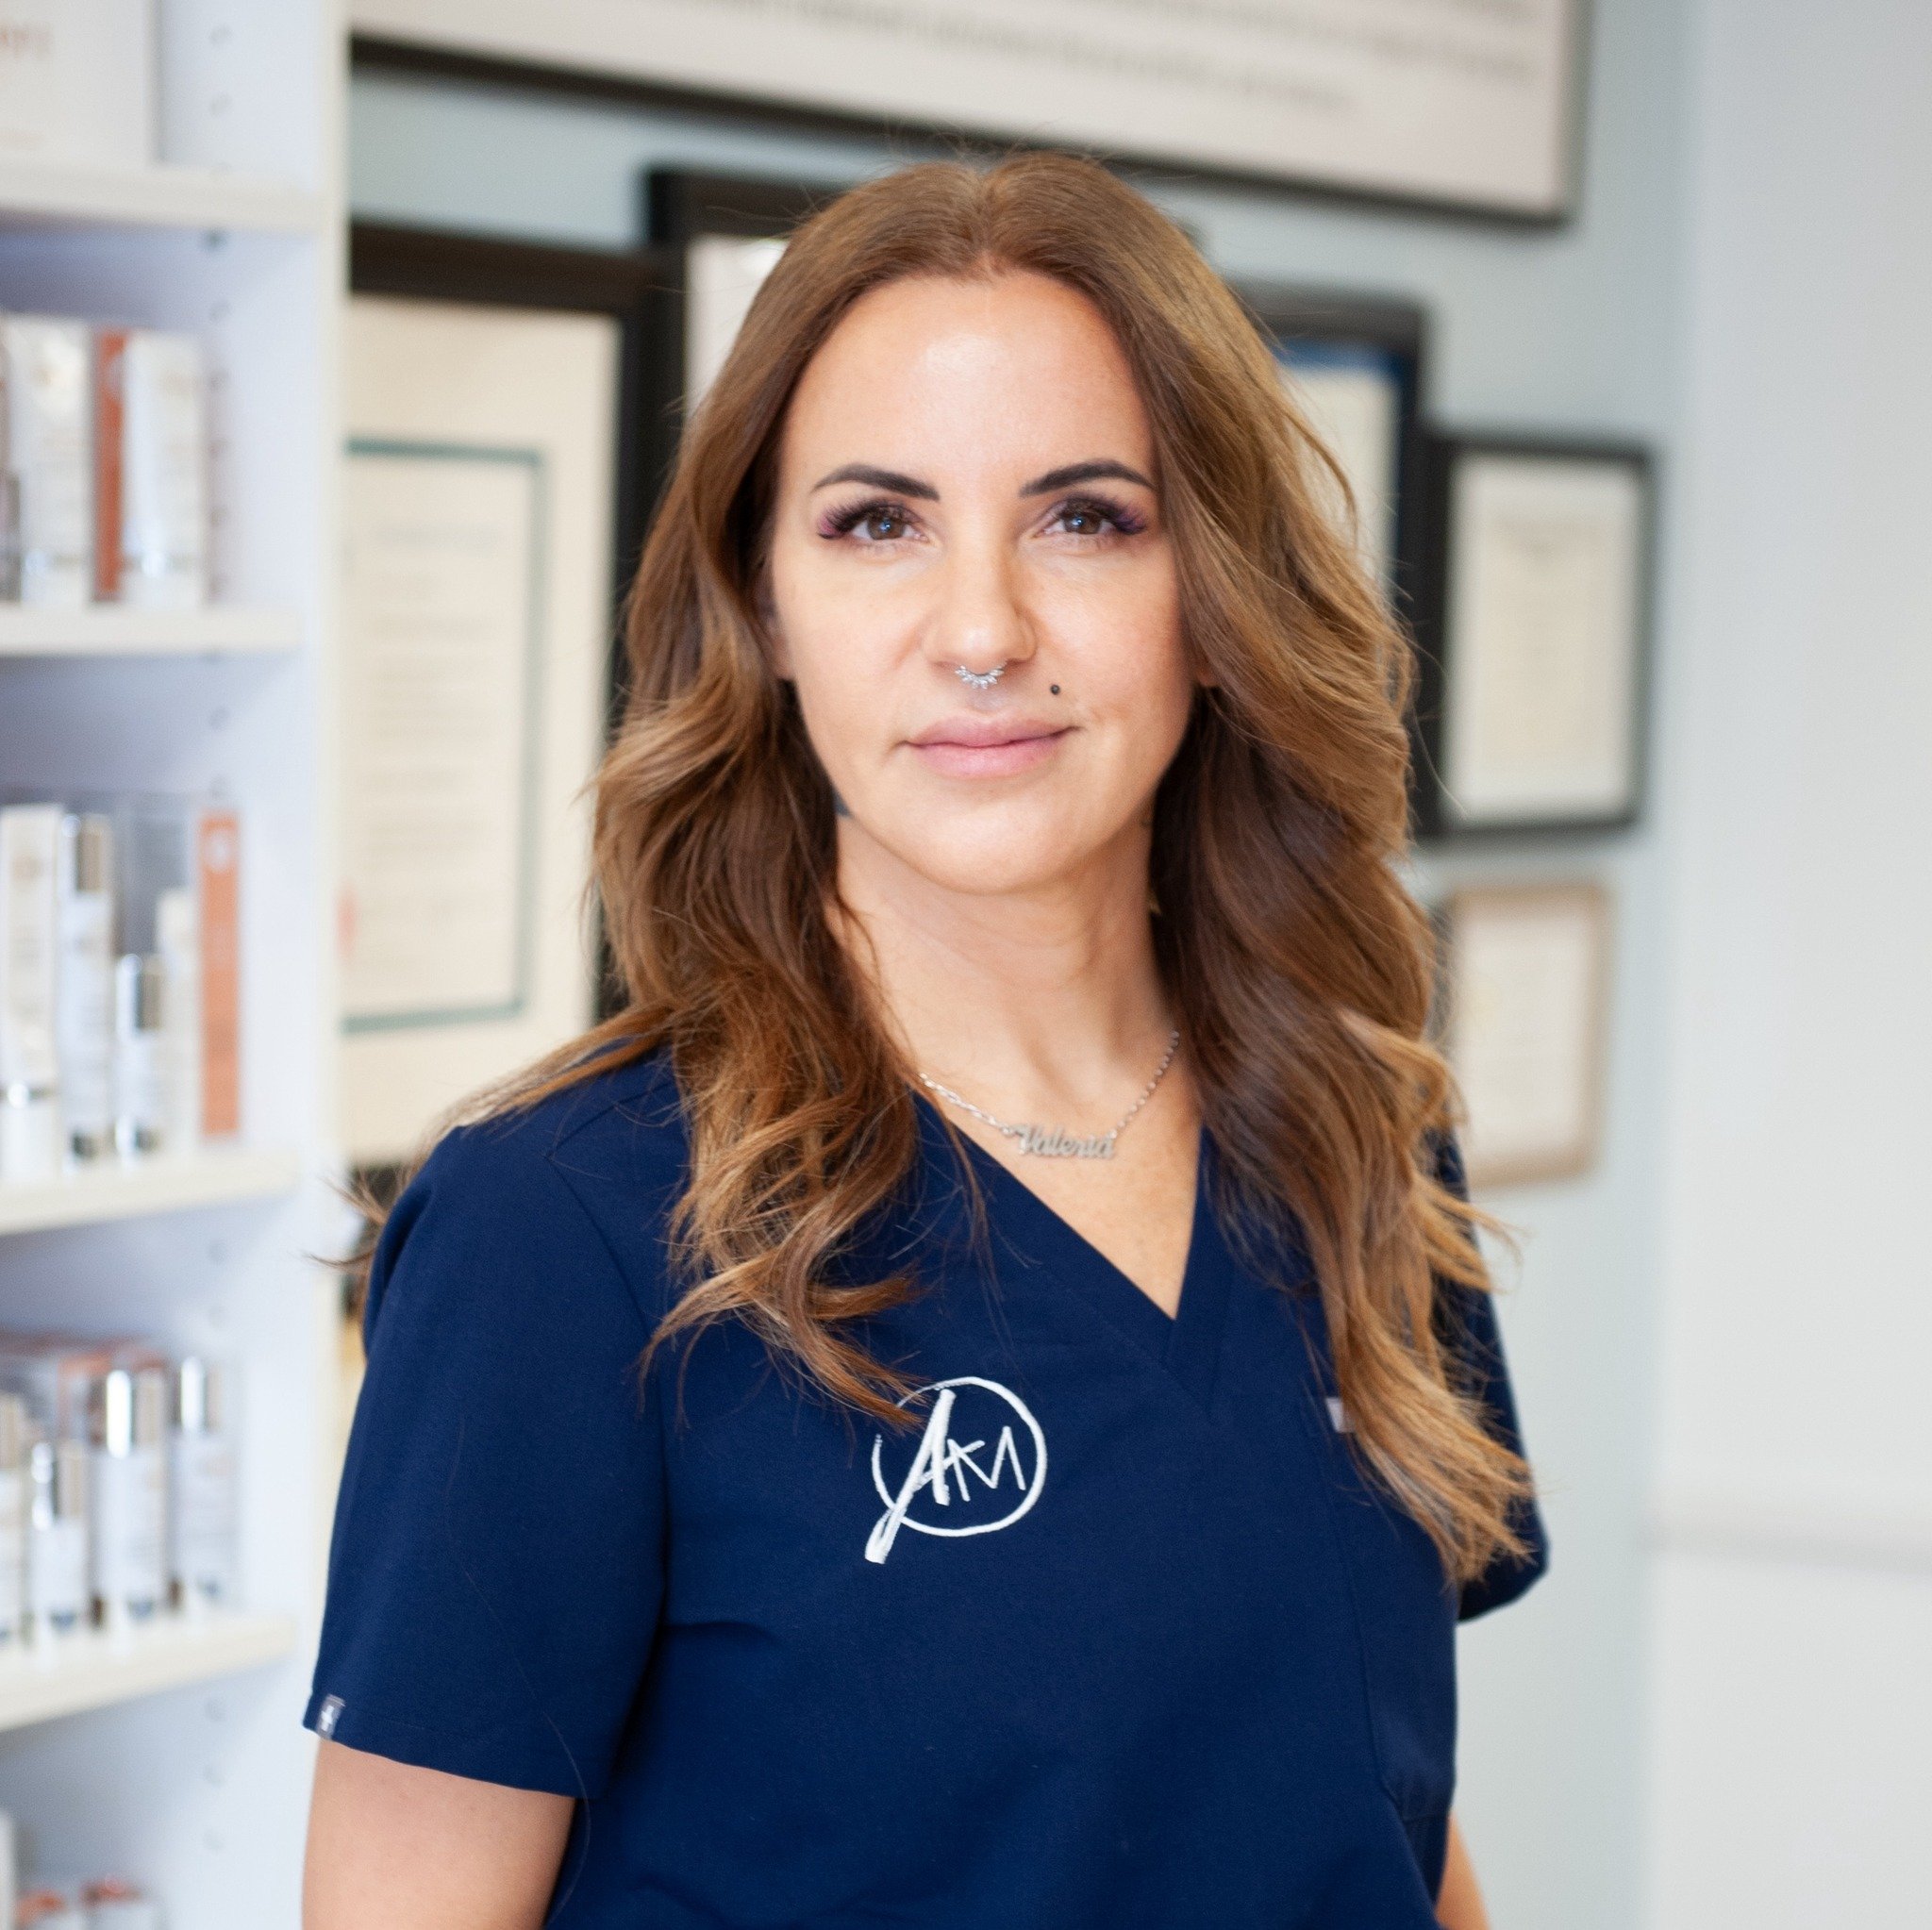 Meet Valeria, Medical Aesthetician/Laser Technician at ArtMed. 💙

Did you know that Val played roller derby for the Hammer City Roller Girls? And that she played in the first game in the history of Ontario? 🛼 Val is one multi-talented woman because